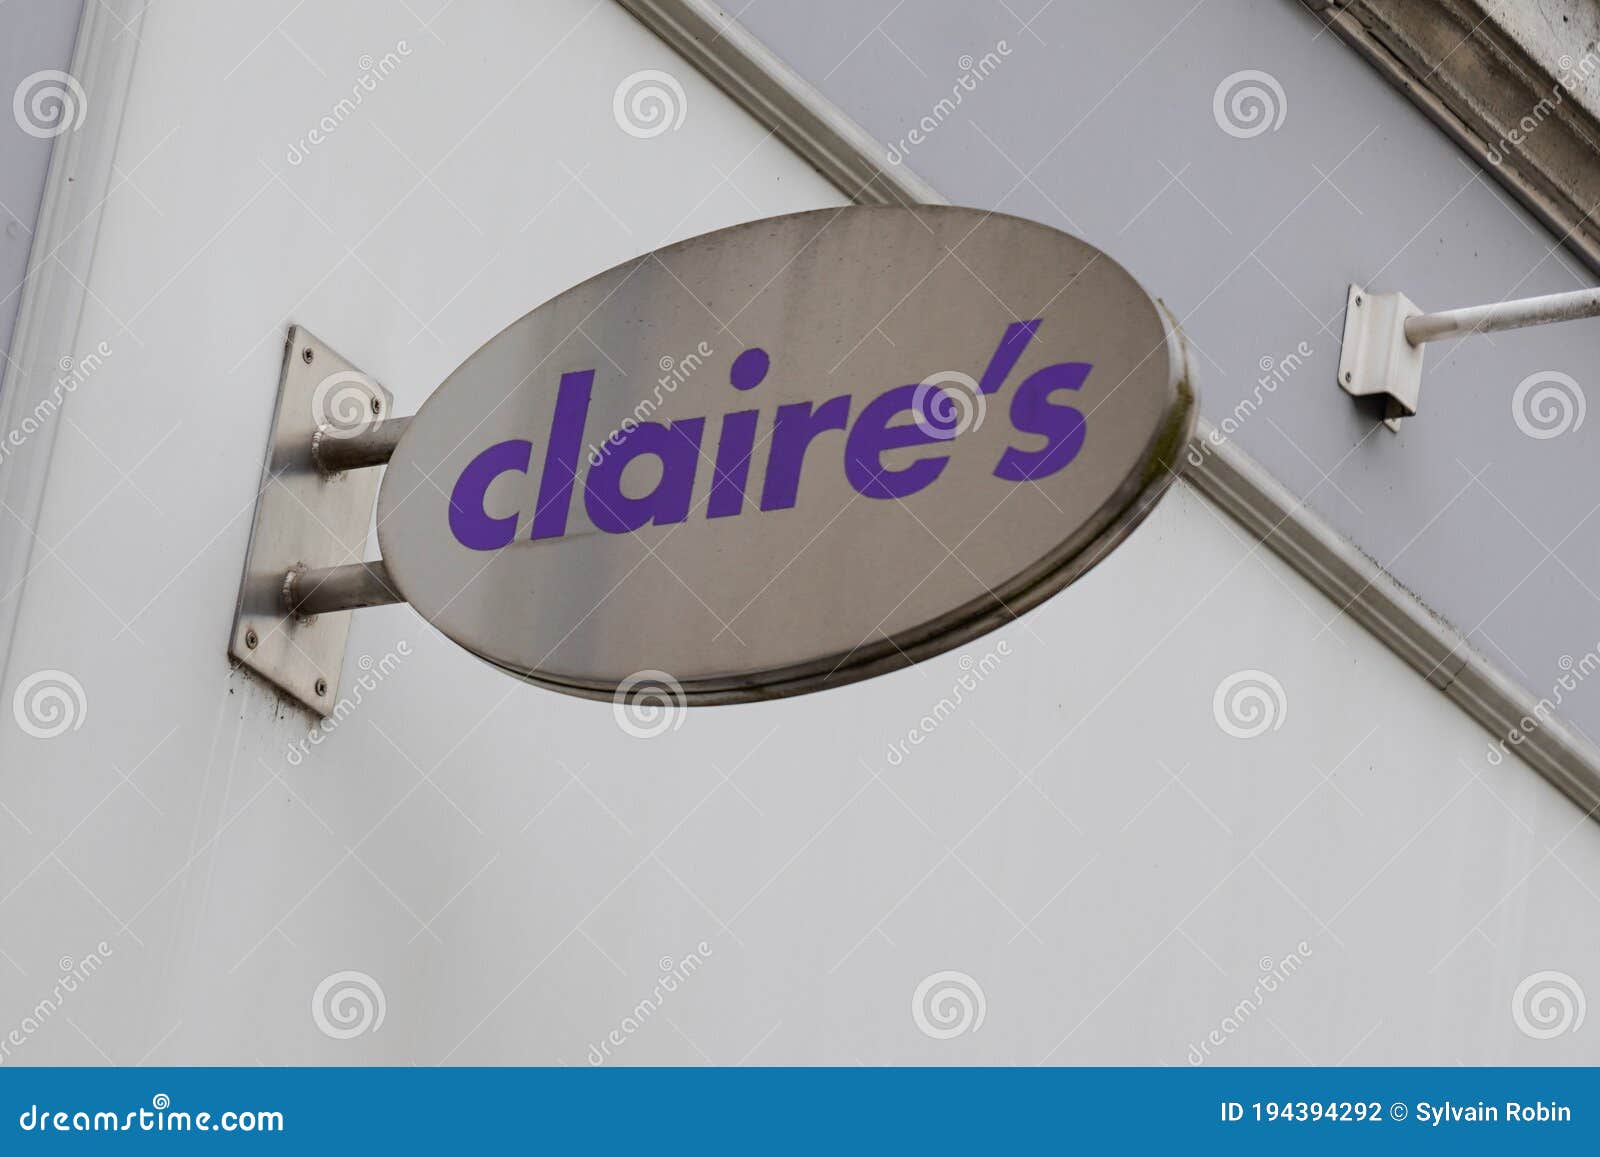 Claires Text Sign and Logo of Claire`s Front of Shop Retailer of Accessories  and Editorial Photography - Image of bordeaux, bright: 194394292